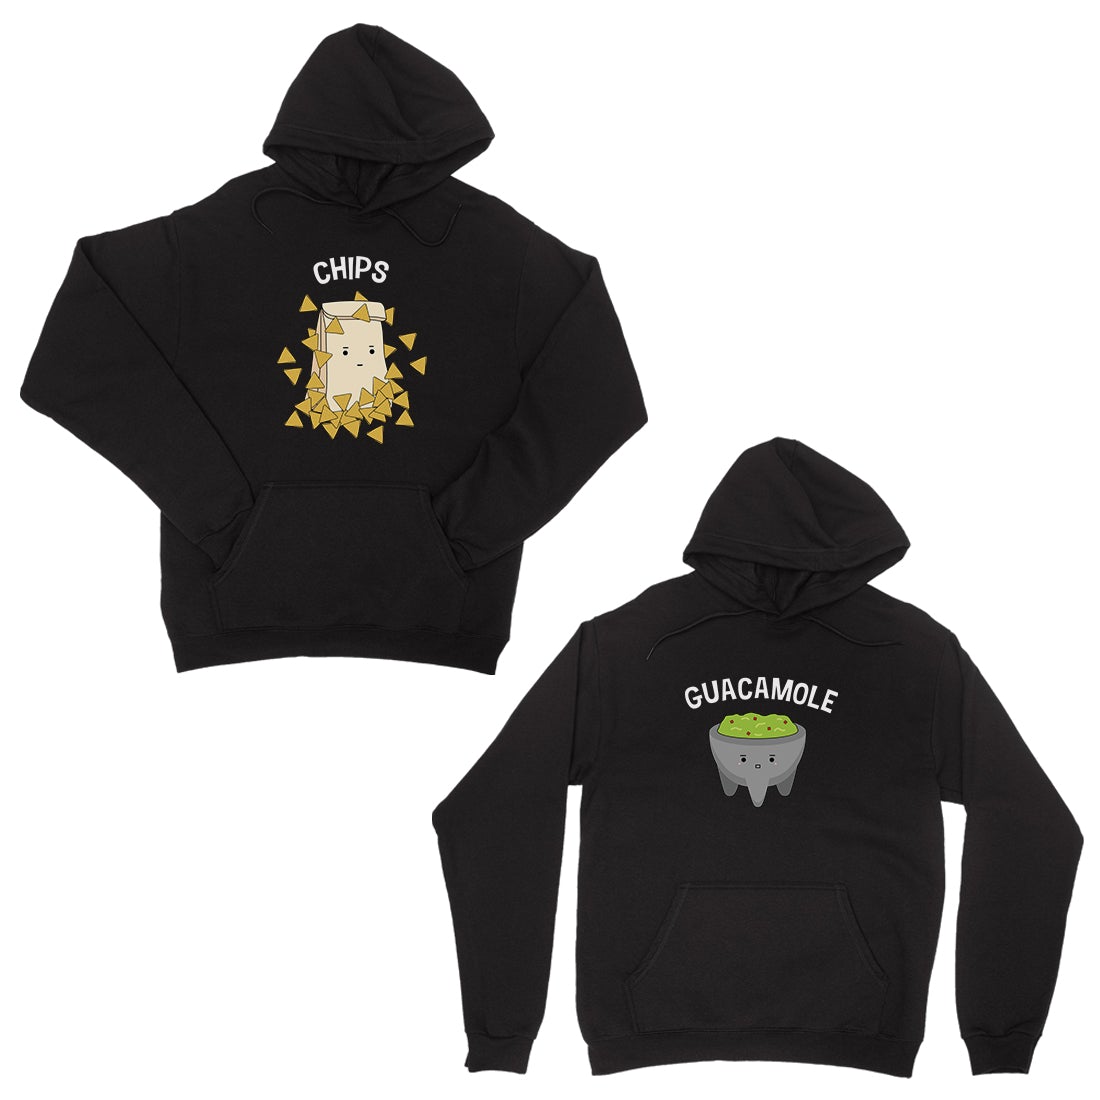 Chips & Guacamole Black Matching Couple Hoodies For Christmas Gift